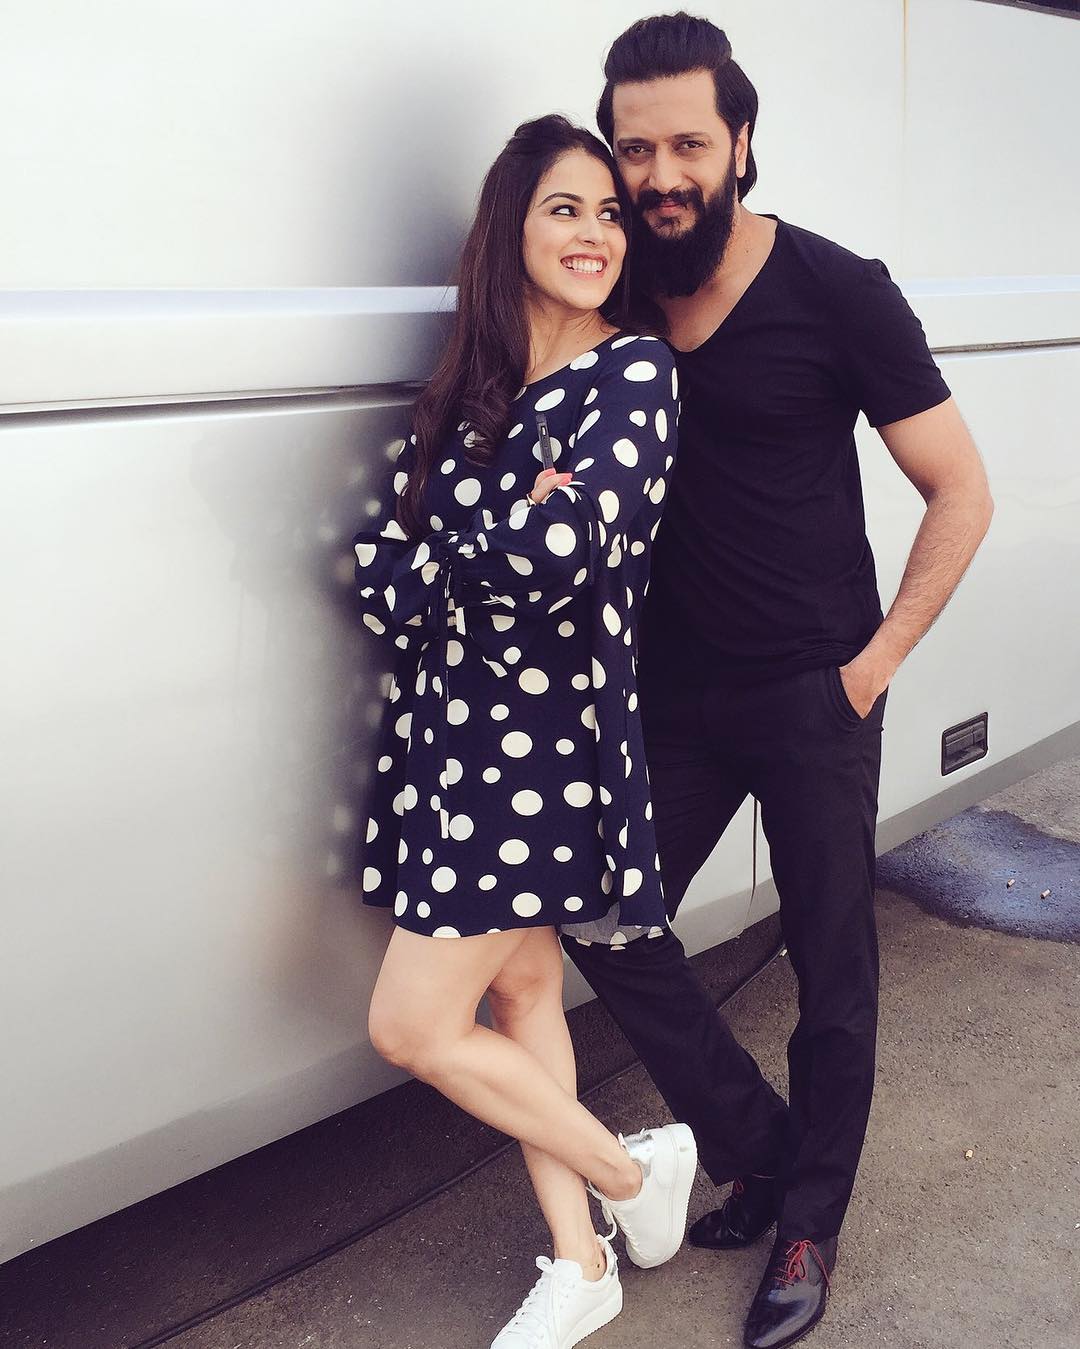 EXCLUSIVE: Riteish Deshmukh on wife Genelia Deshmukh - When people are in love; they out of their own will do better for their partner